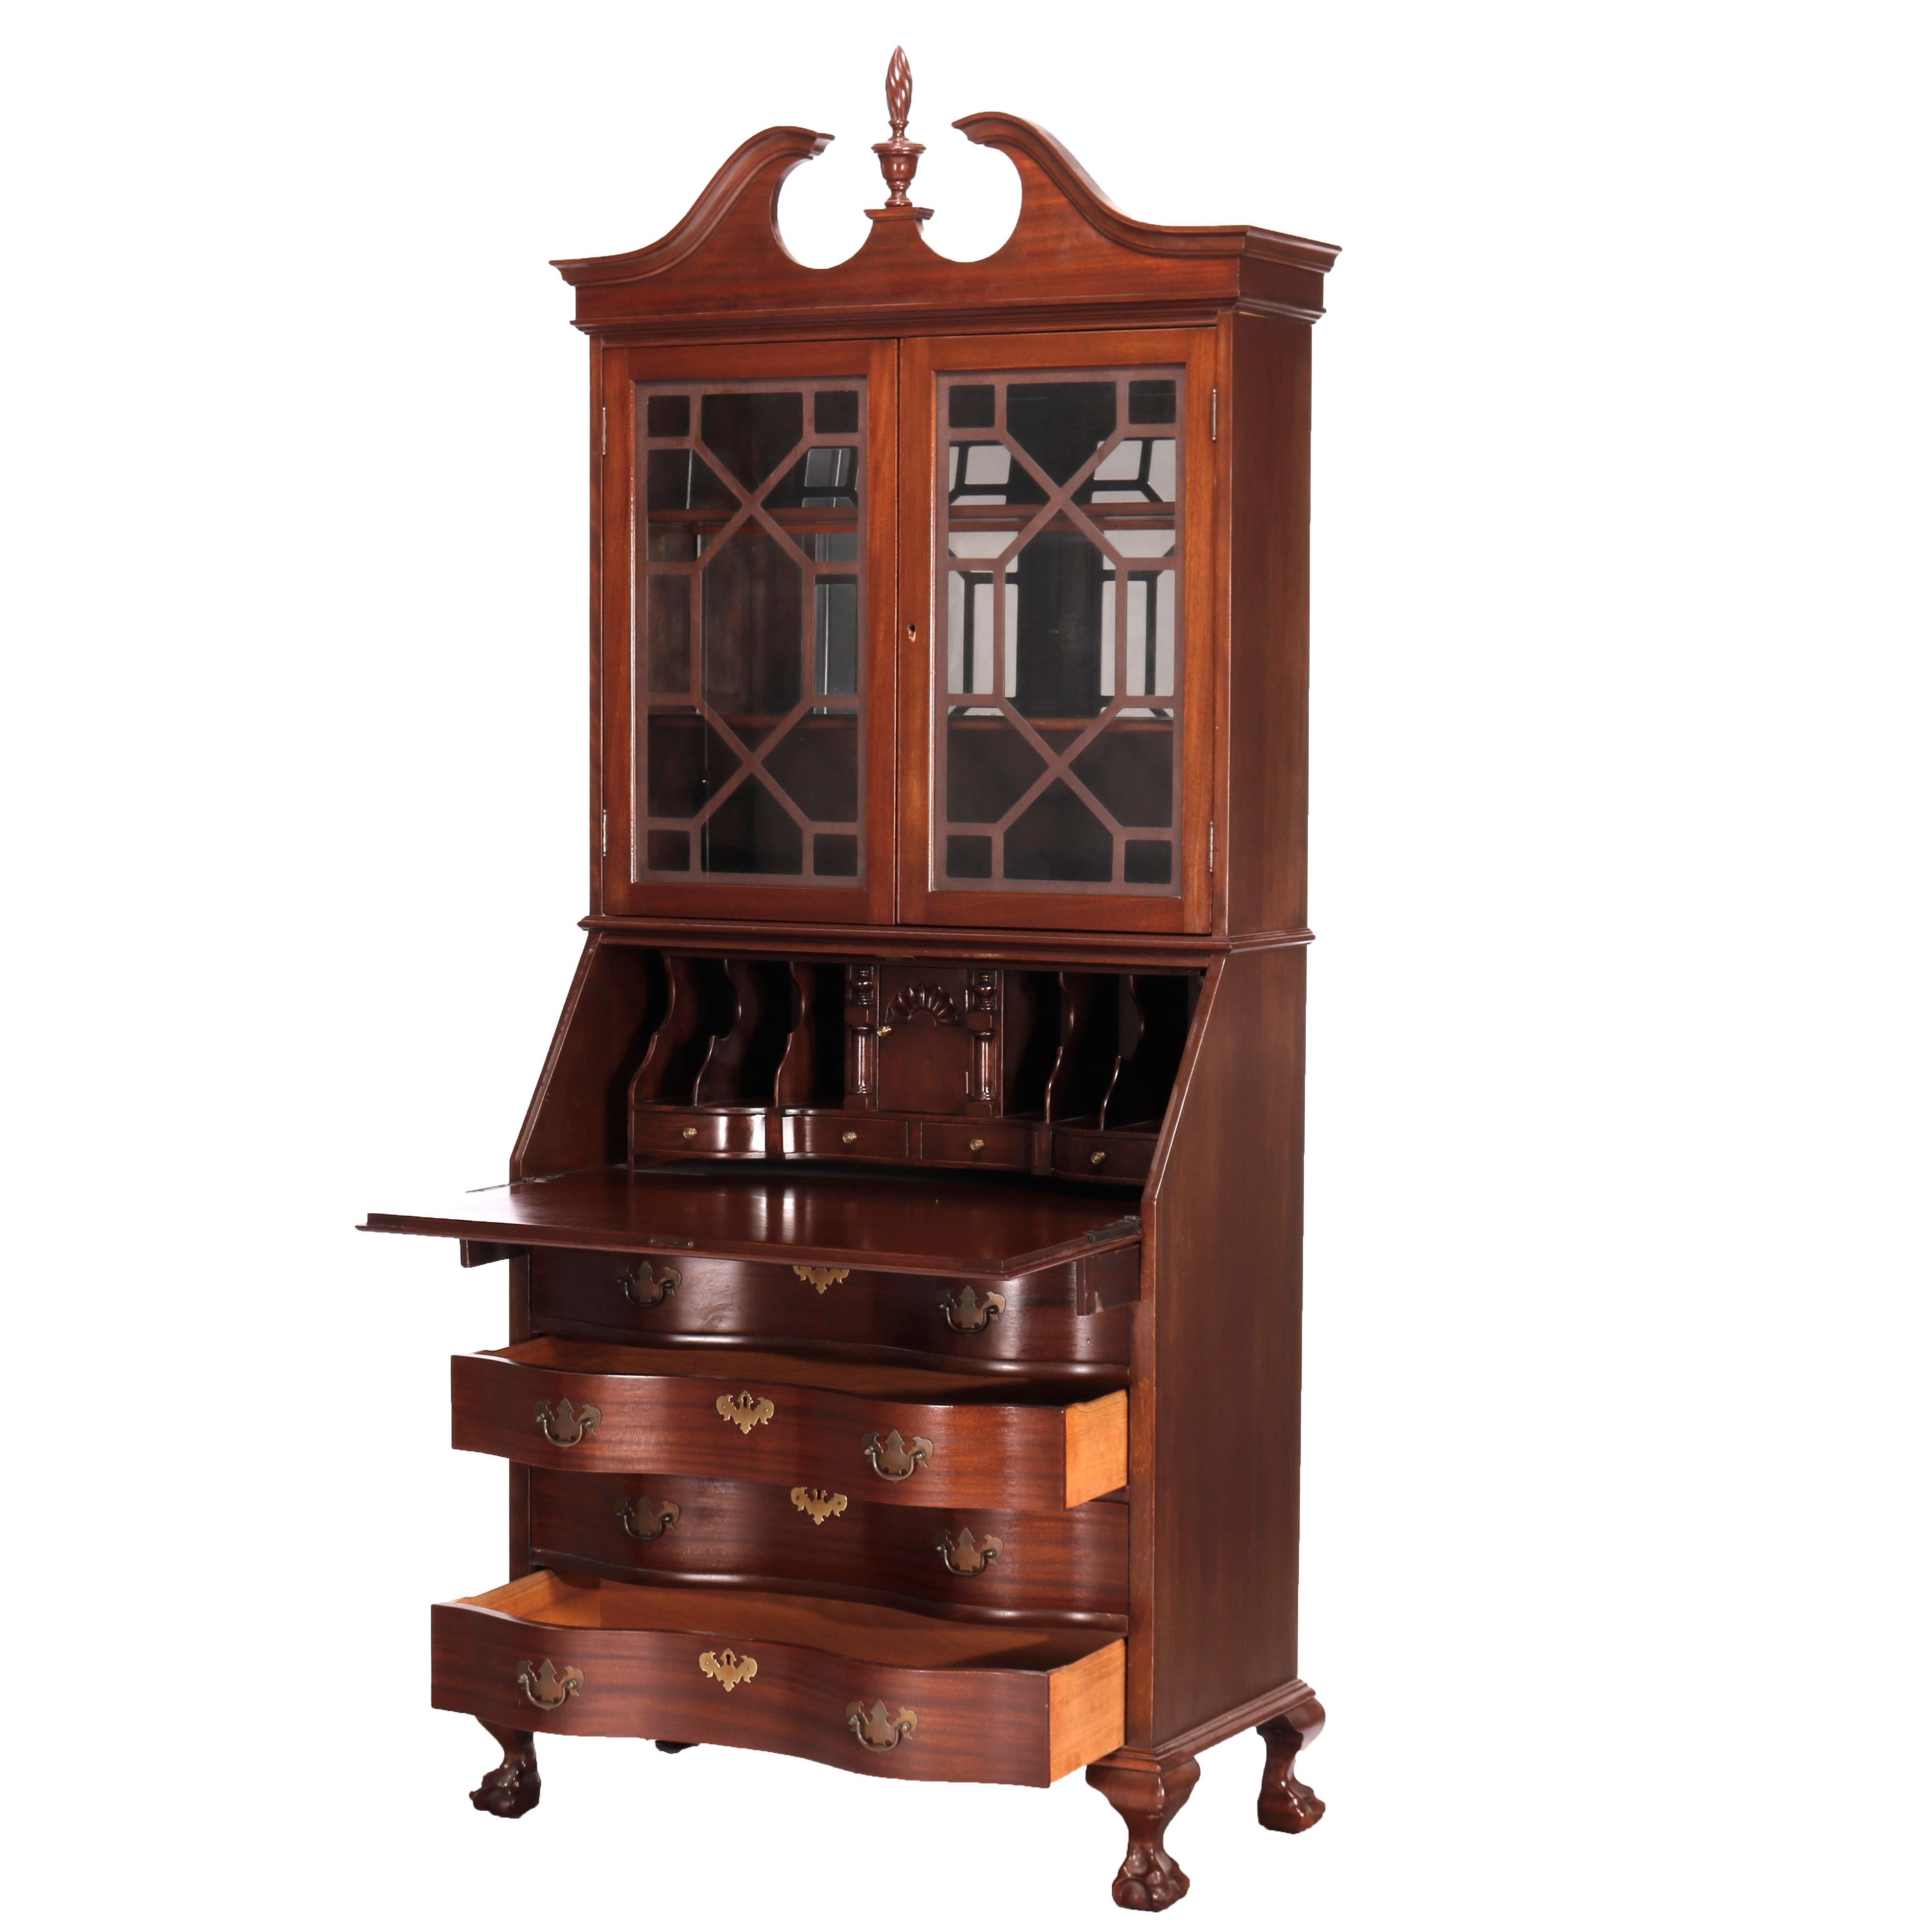 An antique Governor Winthrop secretary offers mahogany construction with upper having broken arch crest with central flame finial over double door bookcase, seated on lower with drop down desk over serpentine case with four drawers and raised on